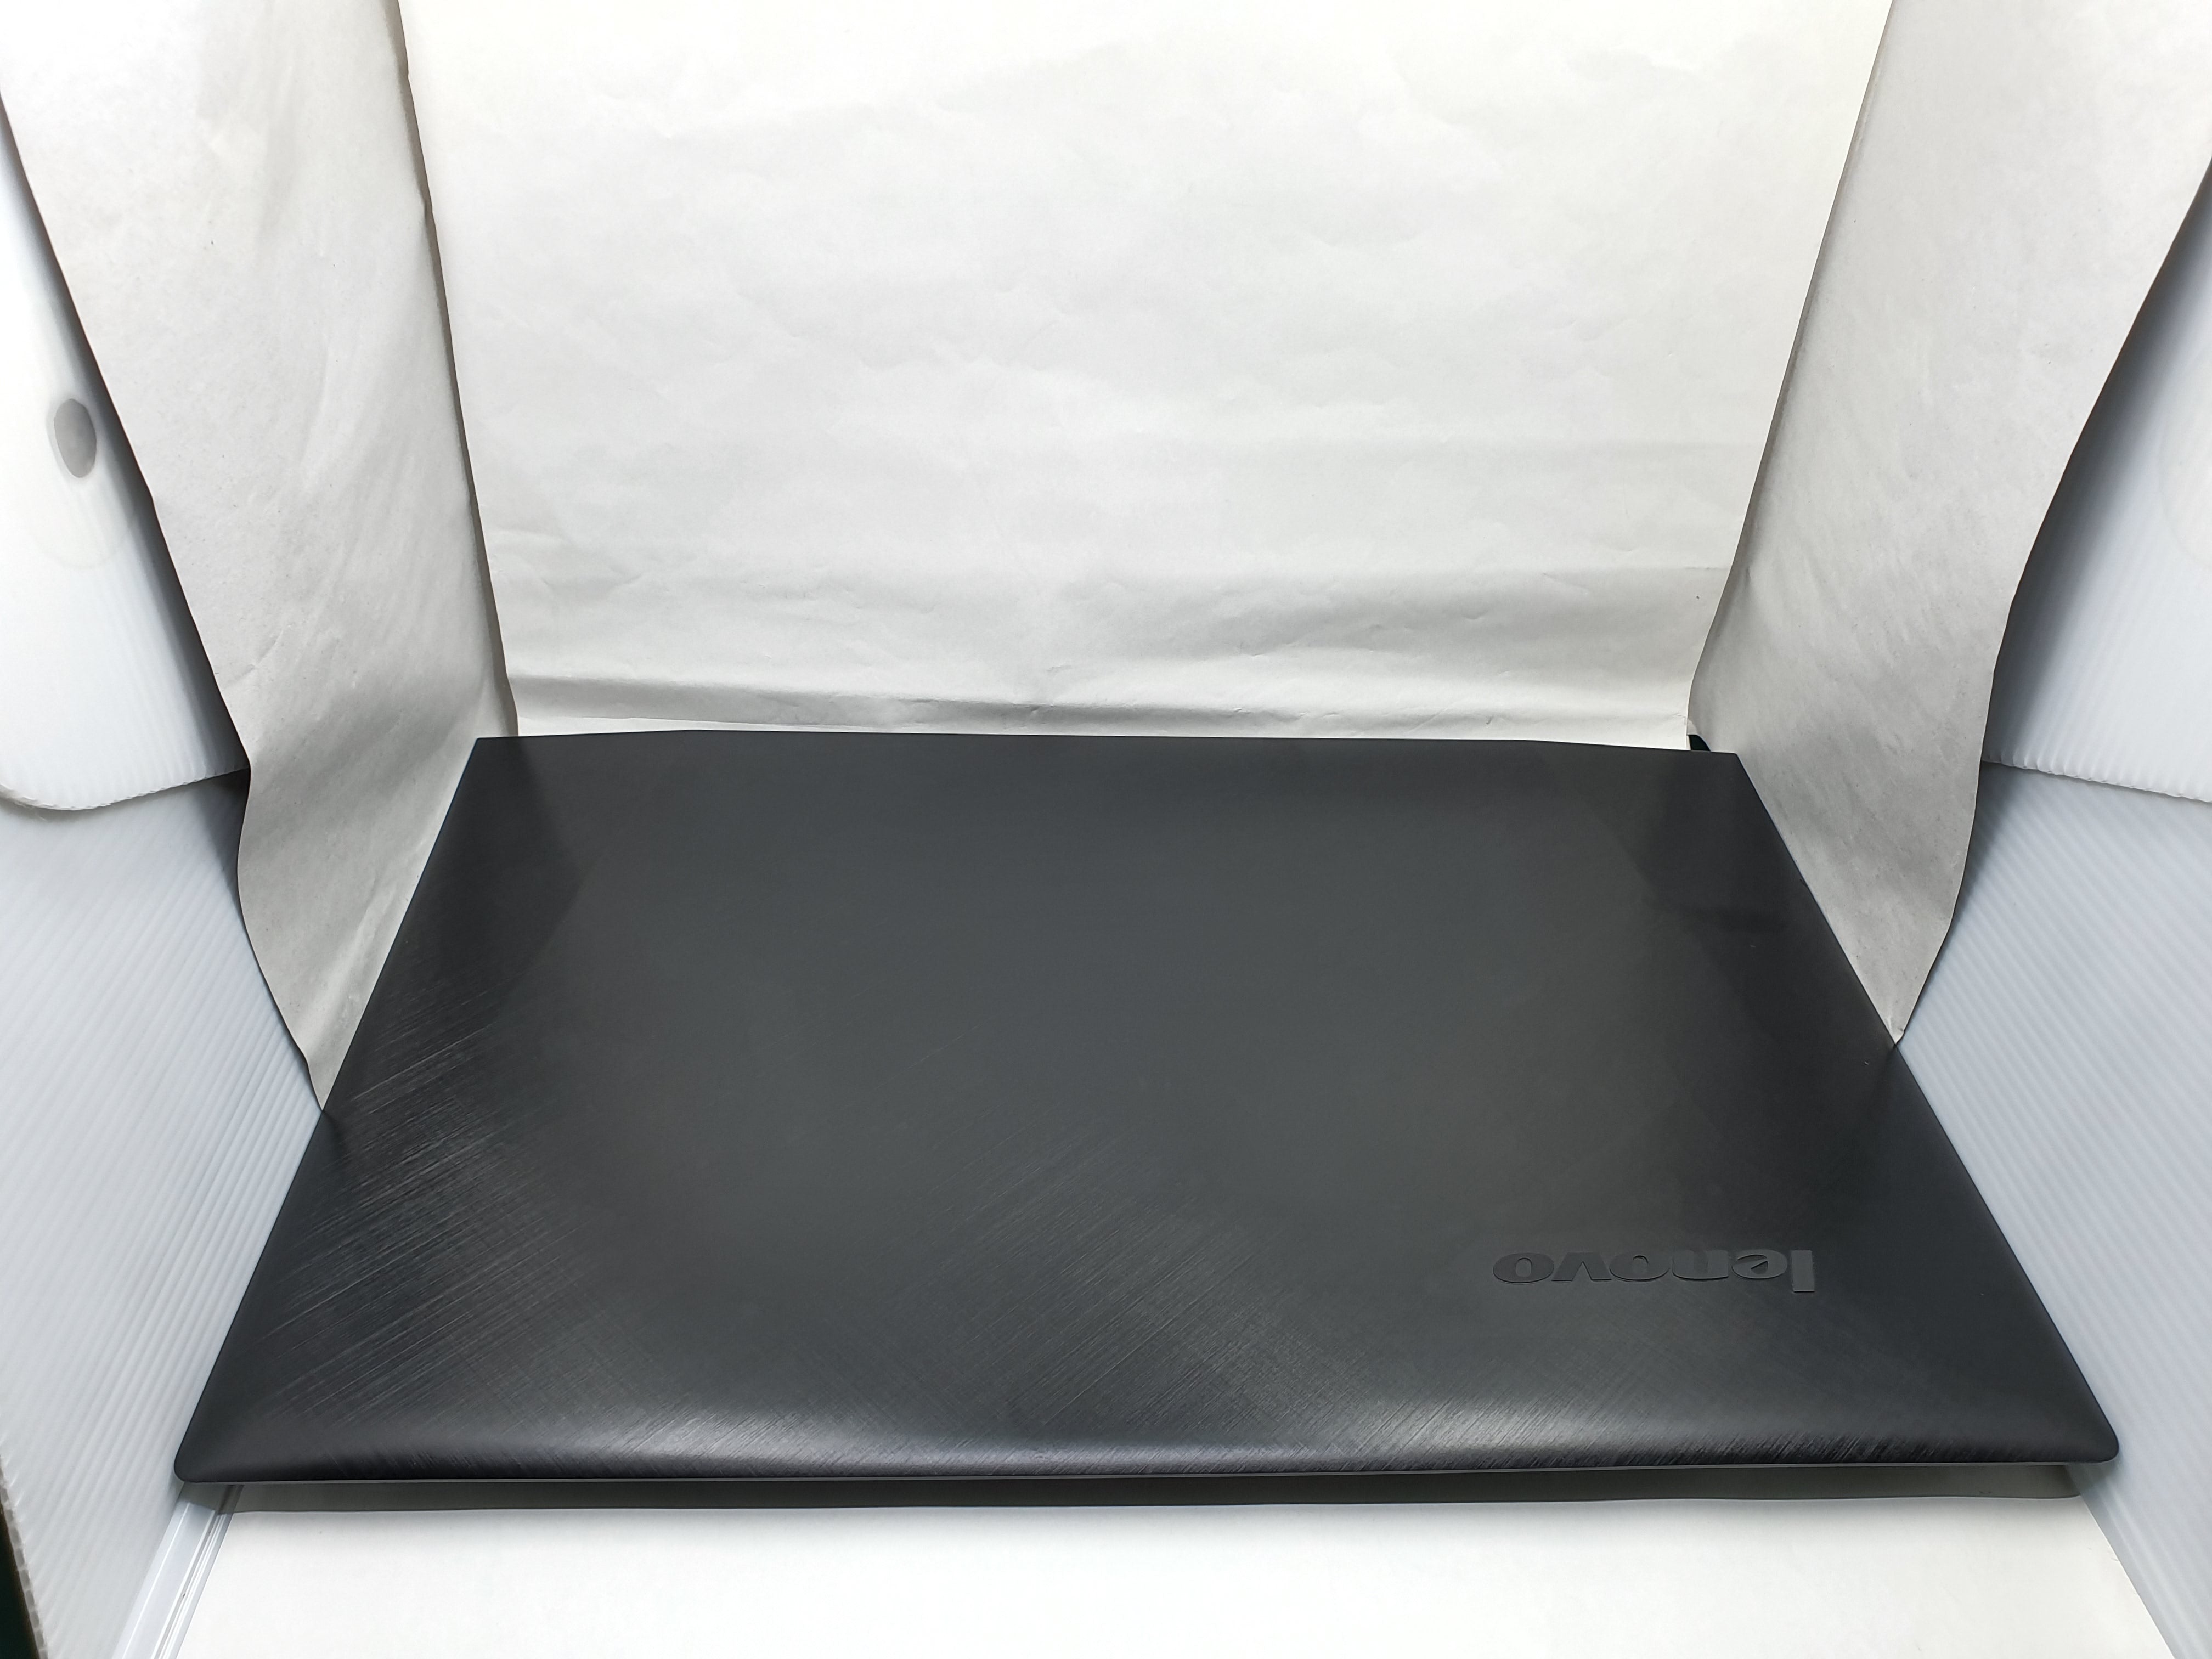 LENOVO LCD COVER Y50-70 WL for Replacement - IdeaPad Y50-70